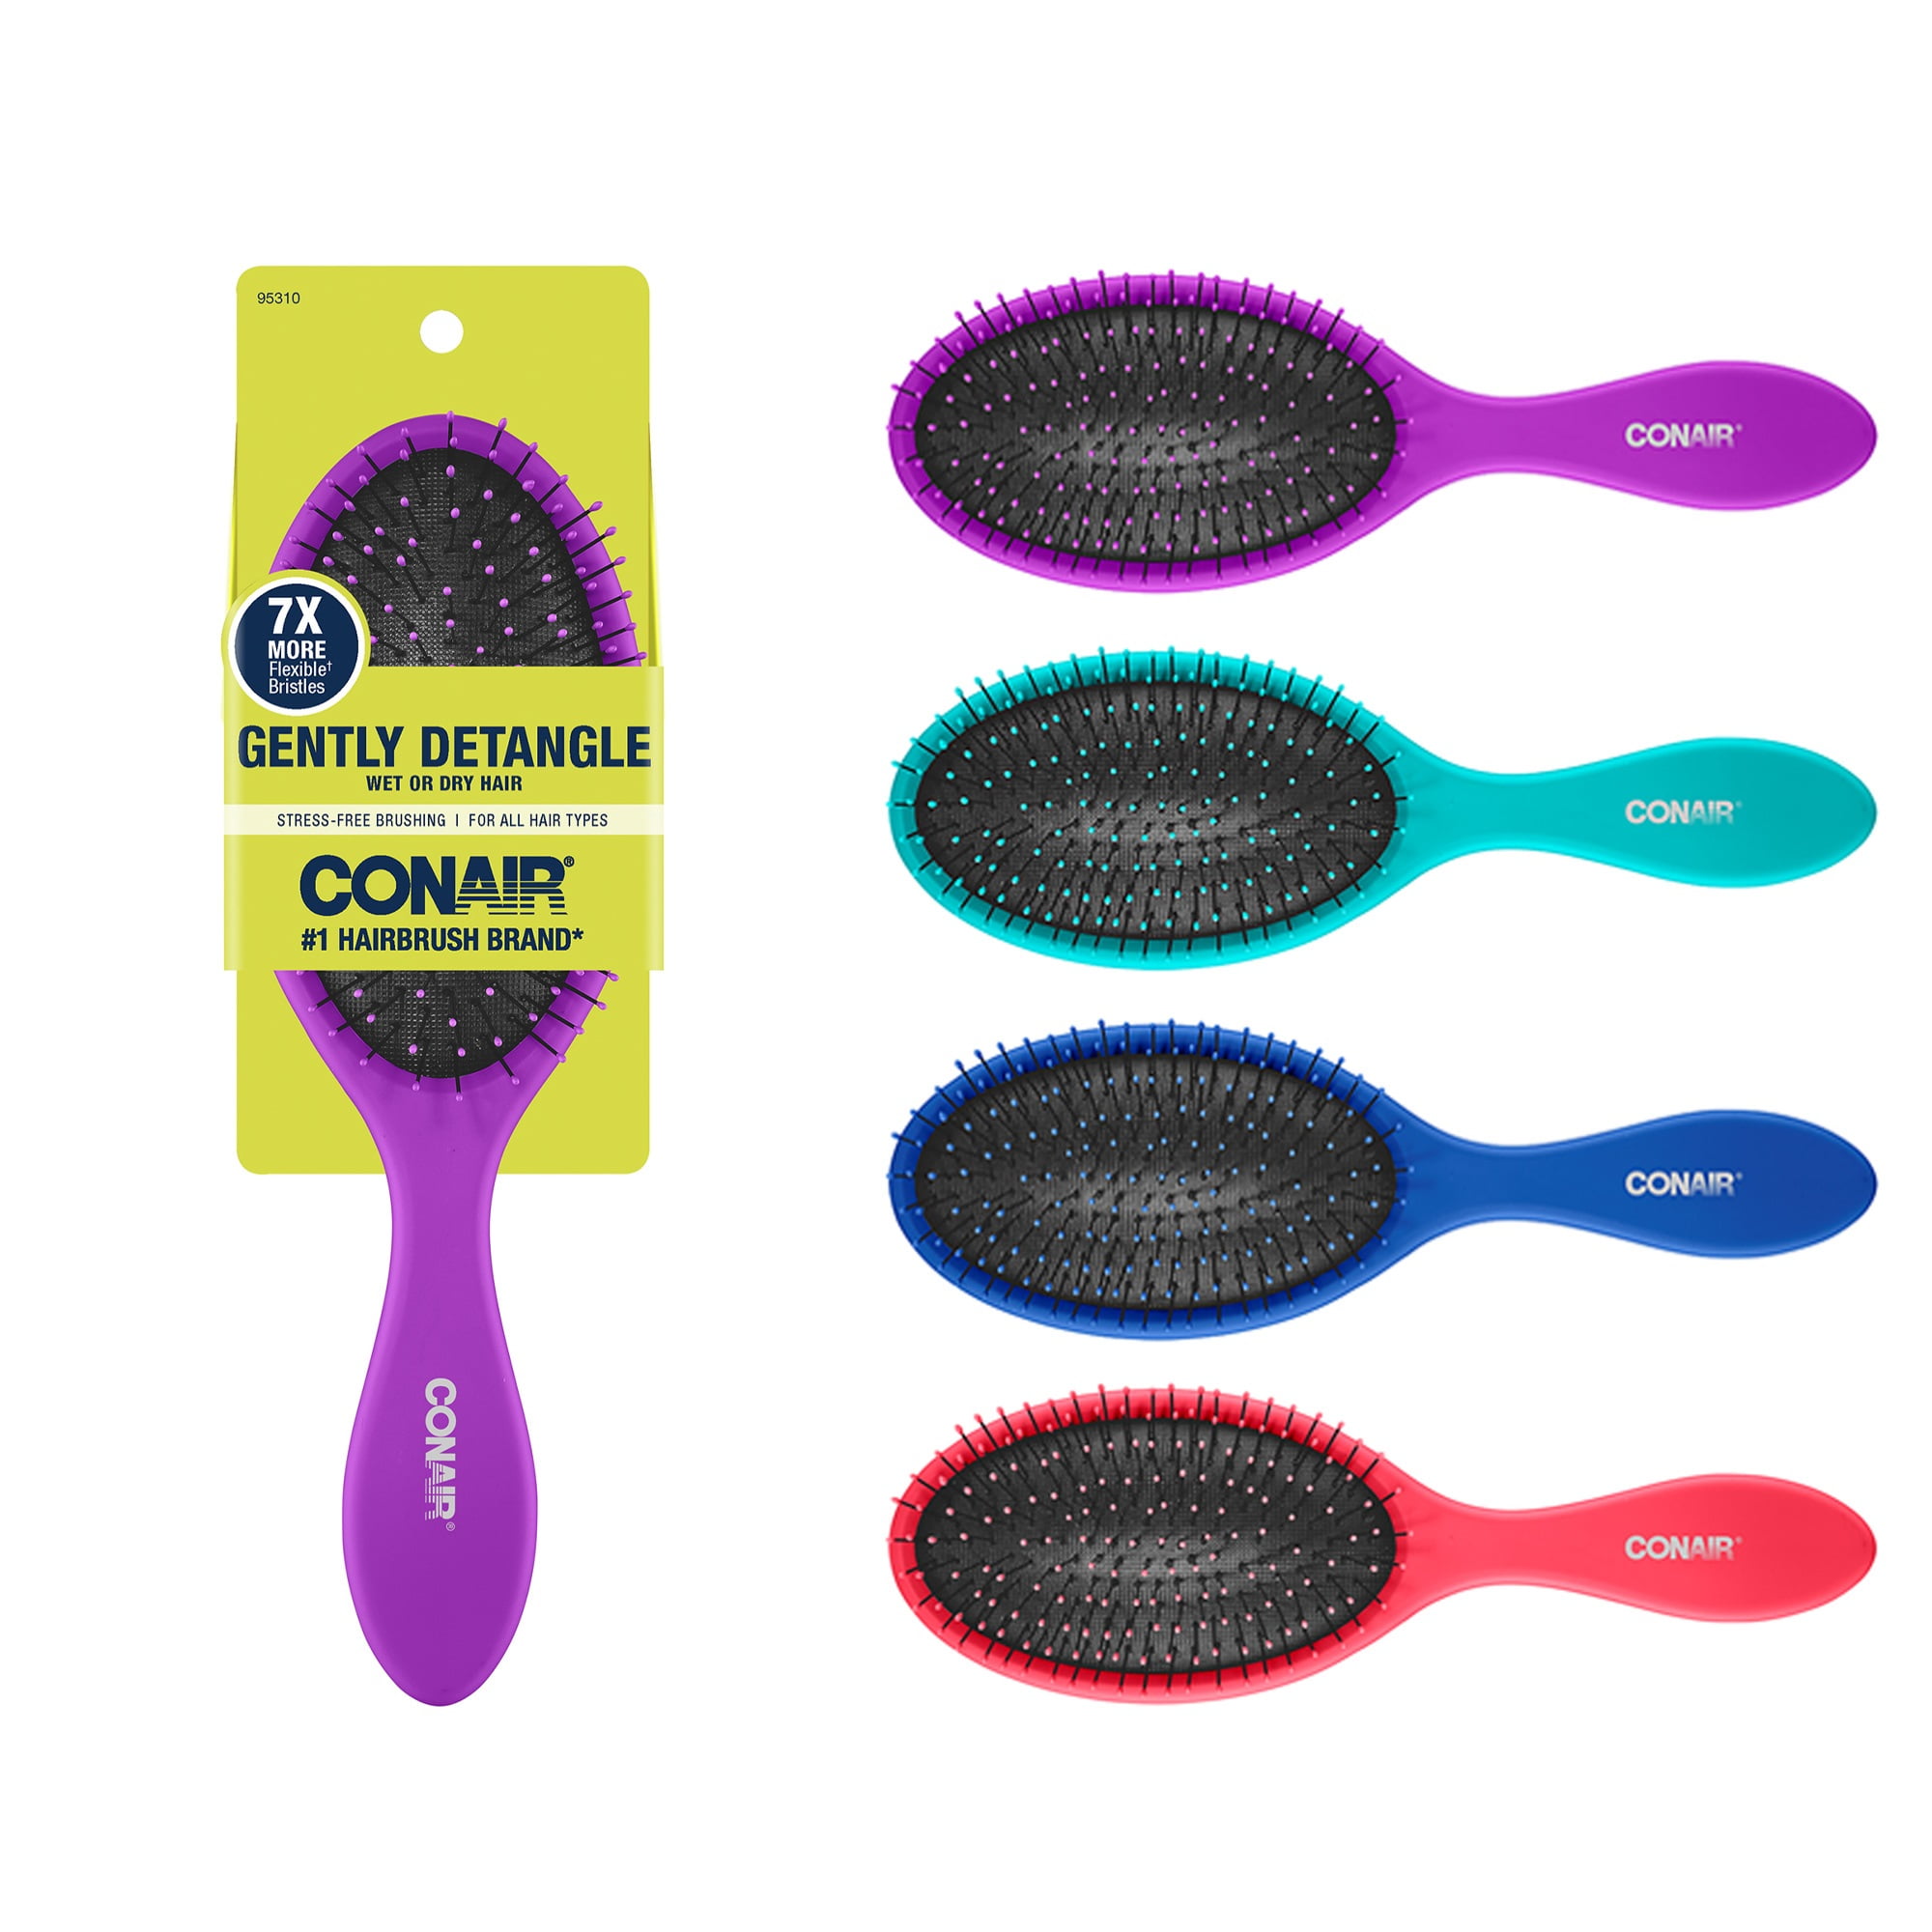 Conair Detangling Bristle Cushion Hairbrush for Wet or Dry Hair and Perfect for All Hair Types (Colors Vary), 1ct